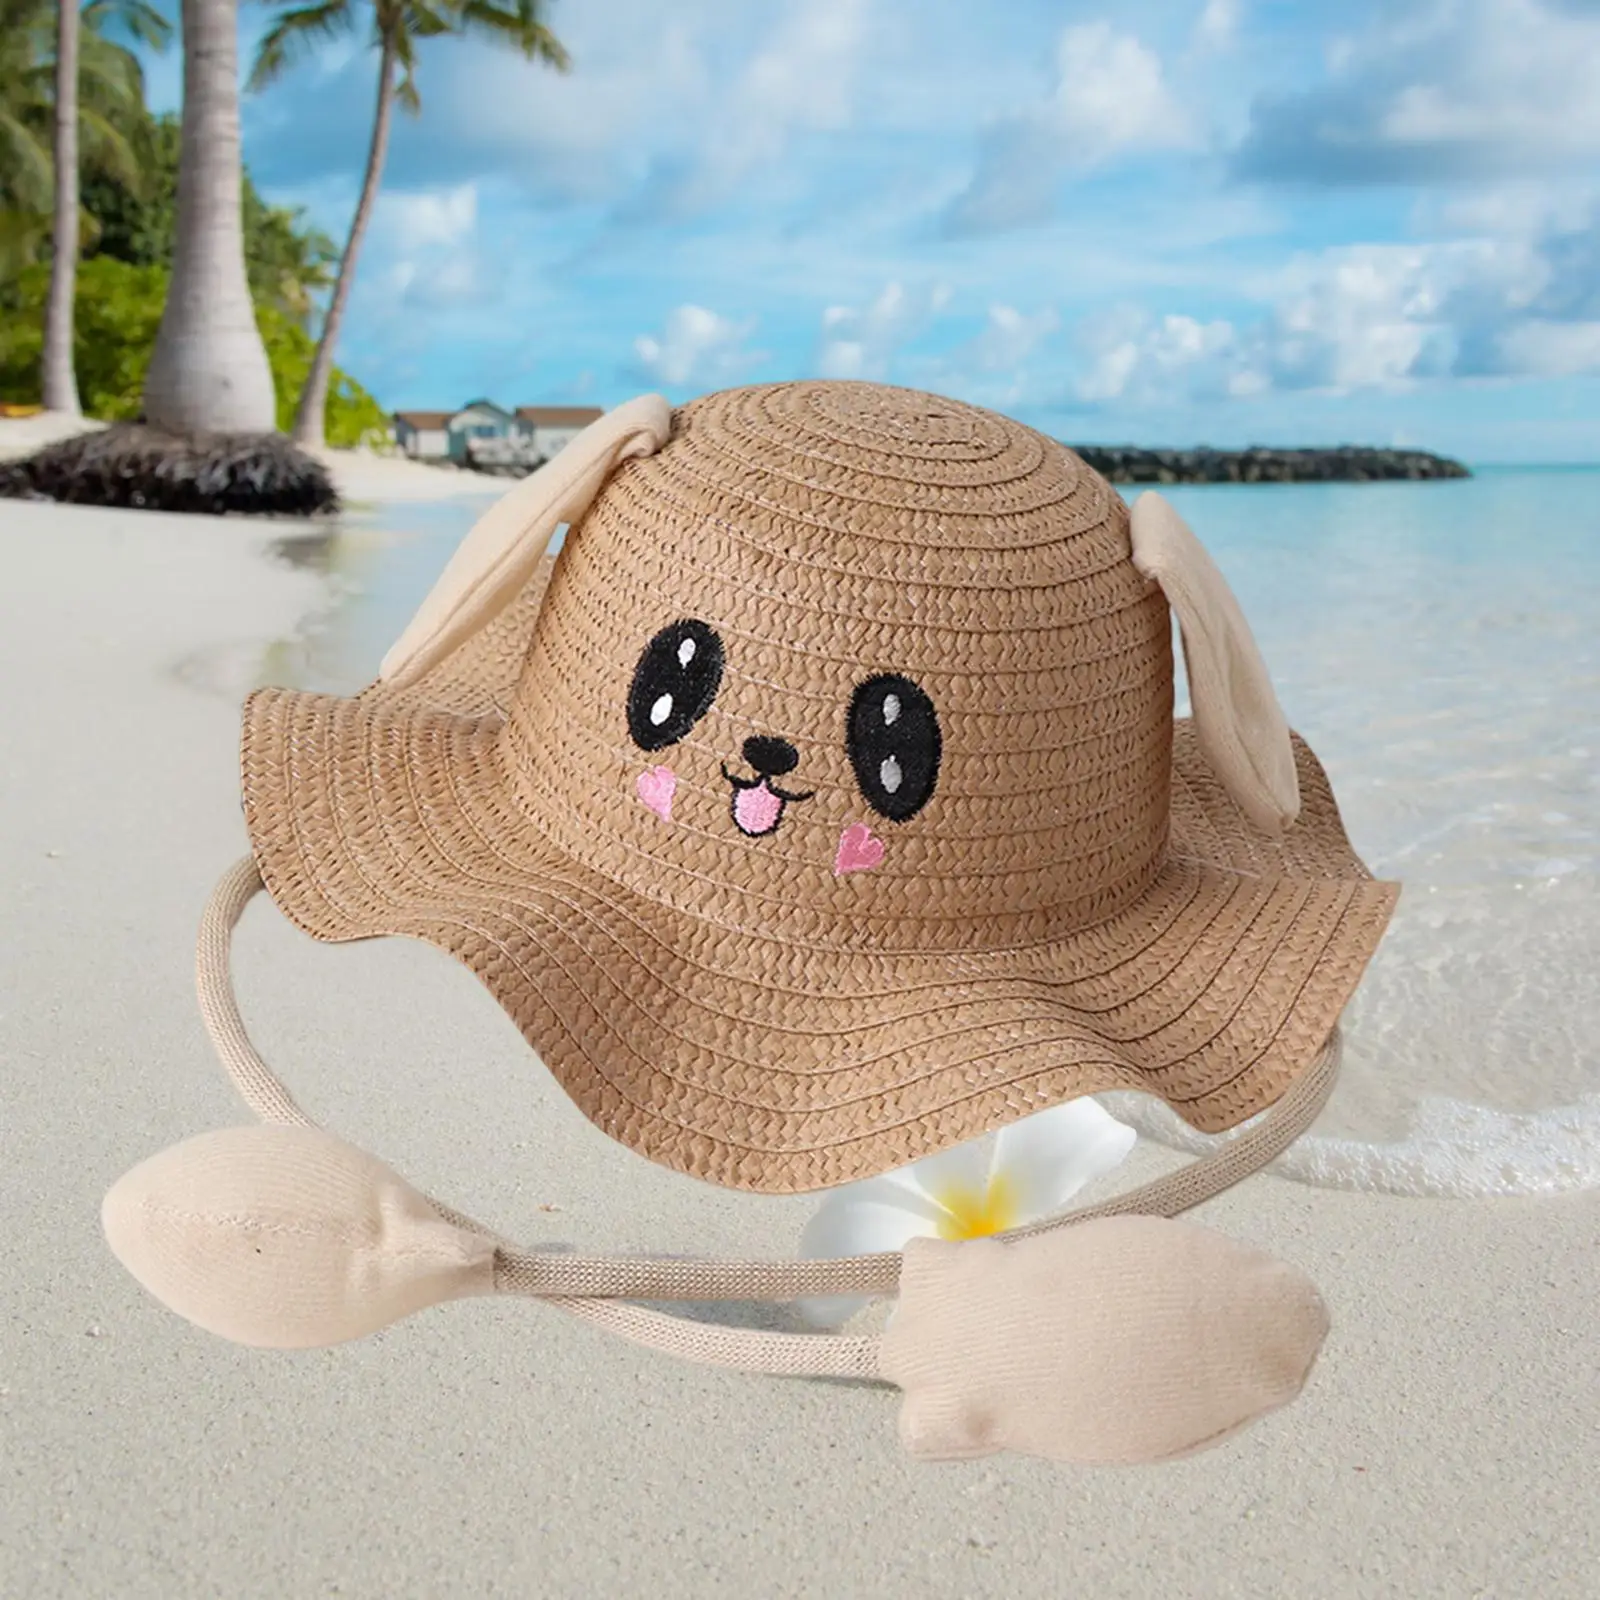 Bunny Straw Hat Cap Fisherman Cap Cute Photo Props Hat Breathable Sun Hat Beach Hat for Holidays Outdoor Vocations Trips Summer